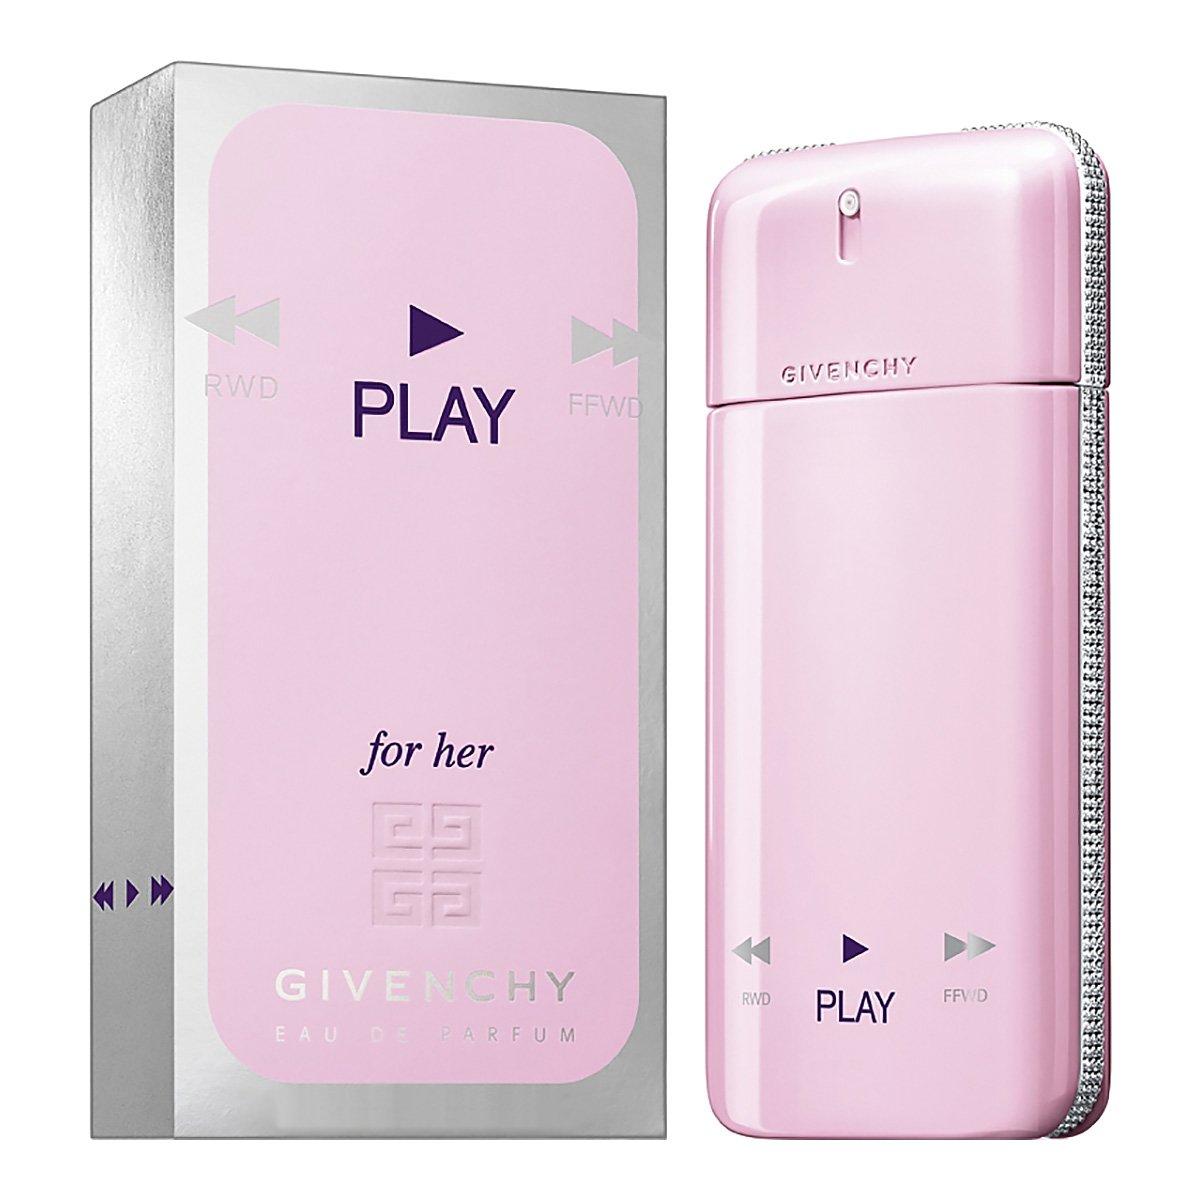 Givenchy Play for Her edp 75ml (Качество,Стойкость) - фото 1 - id-p187670583